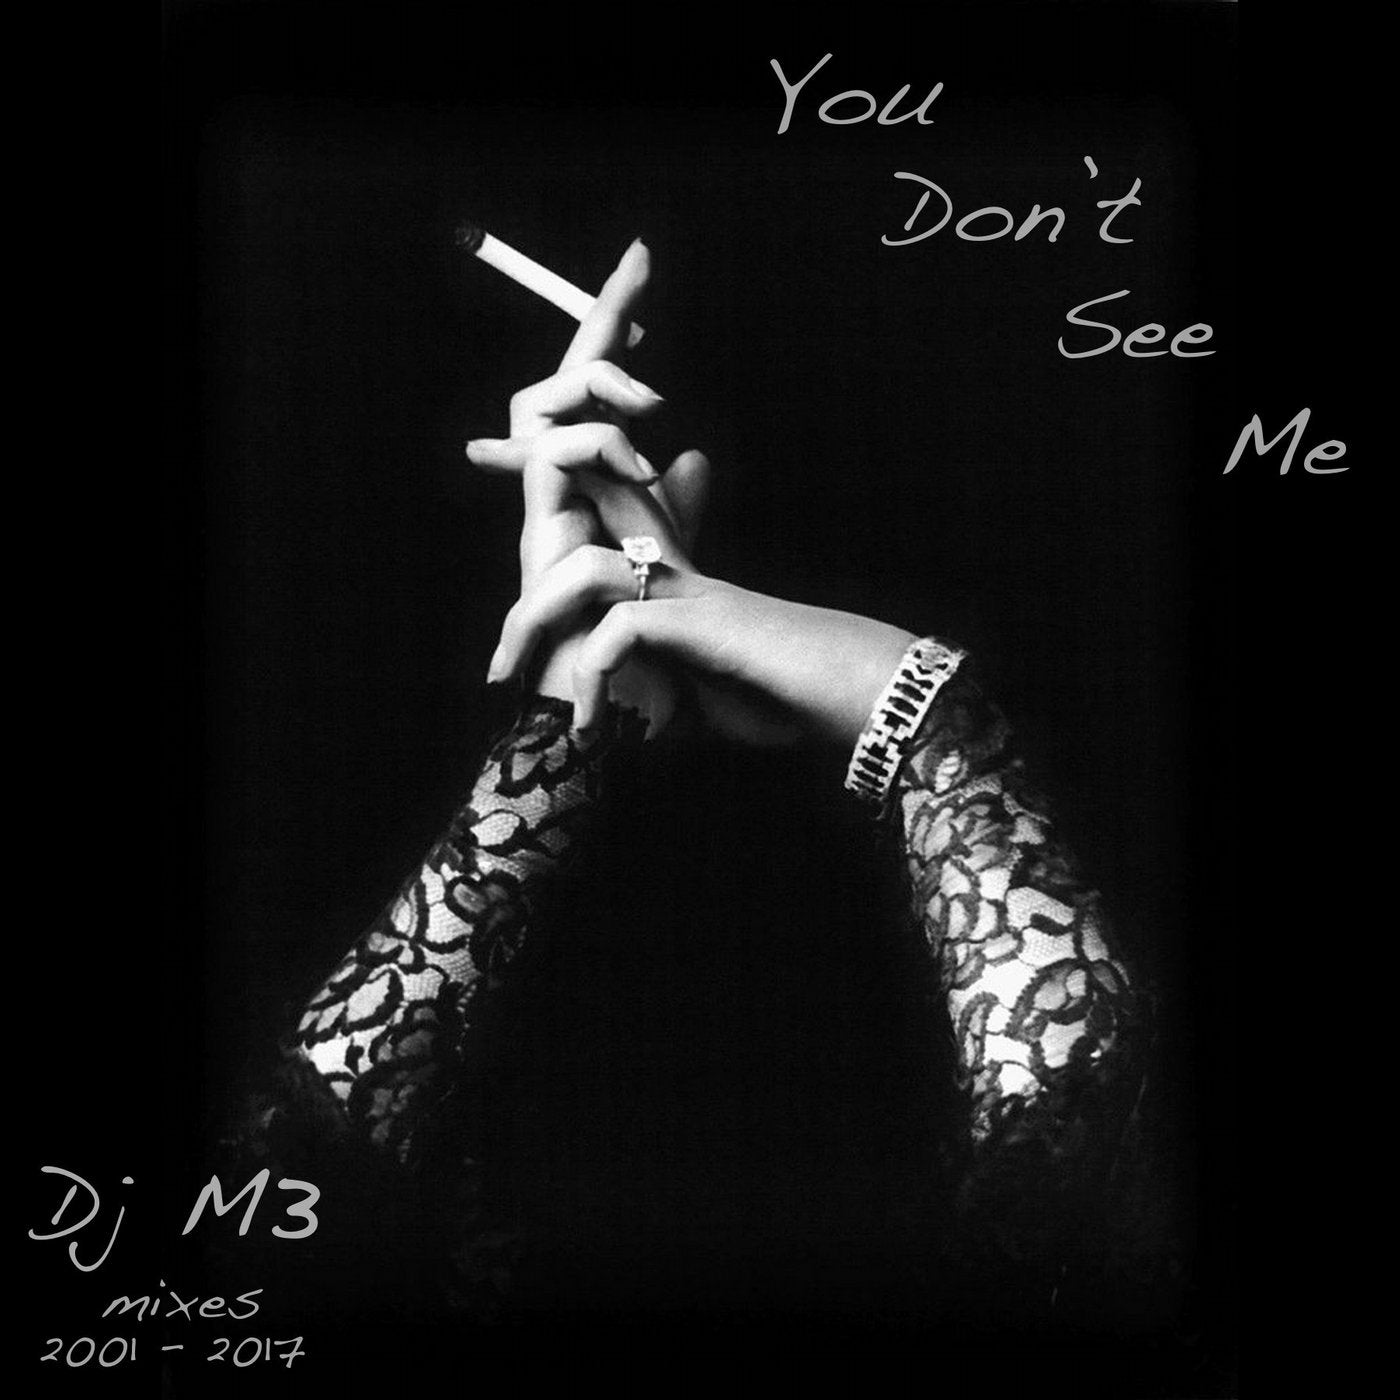 You Don't See Me (2001 - 2017 Mixes)